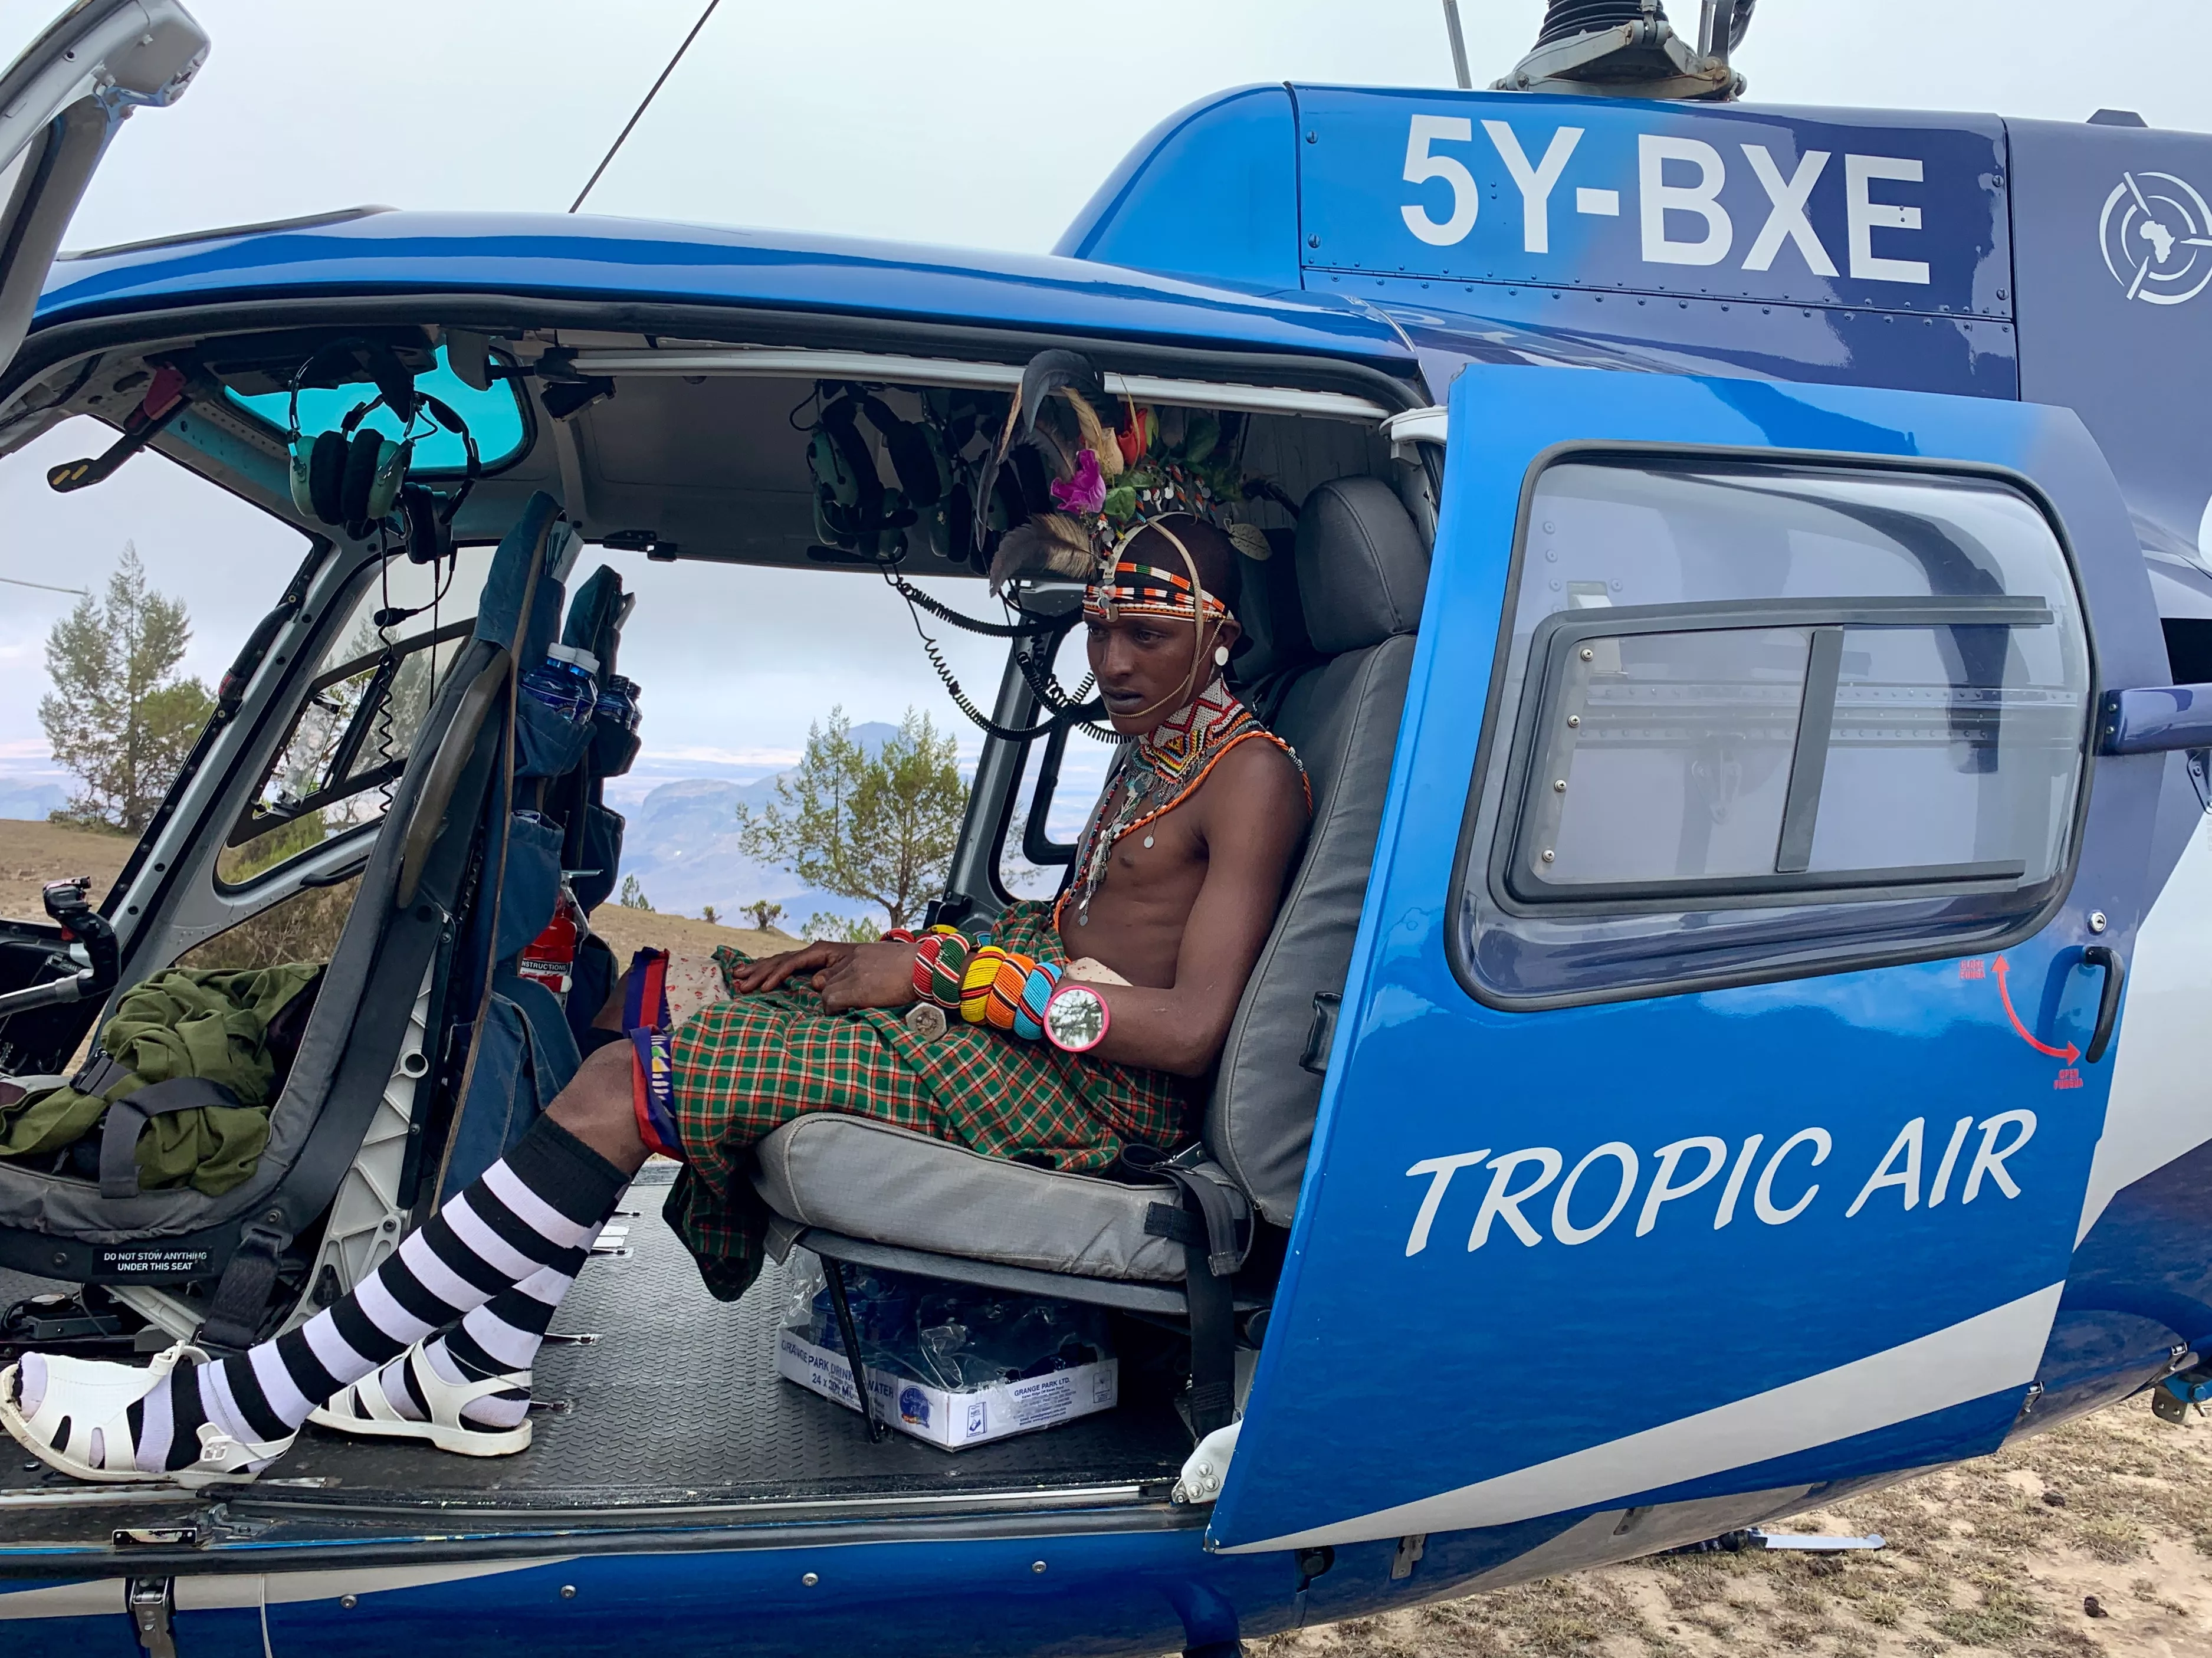 Tropic Air in Kenya, Africa | Helicopter Sport - Rated 1